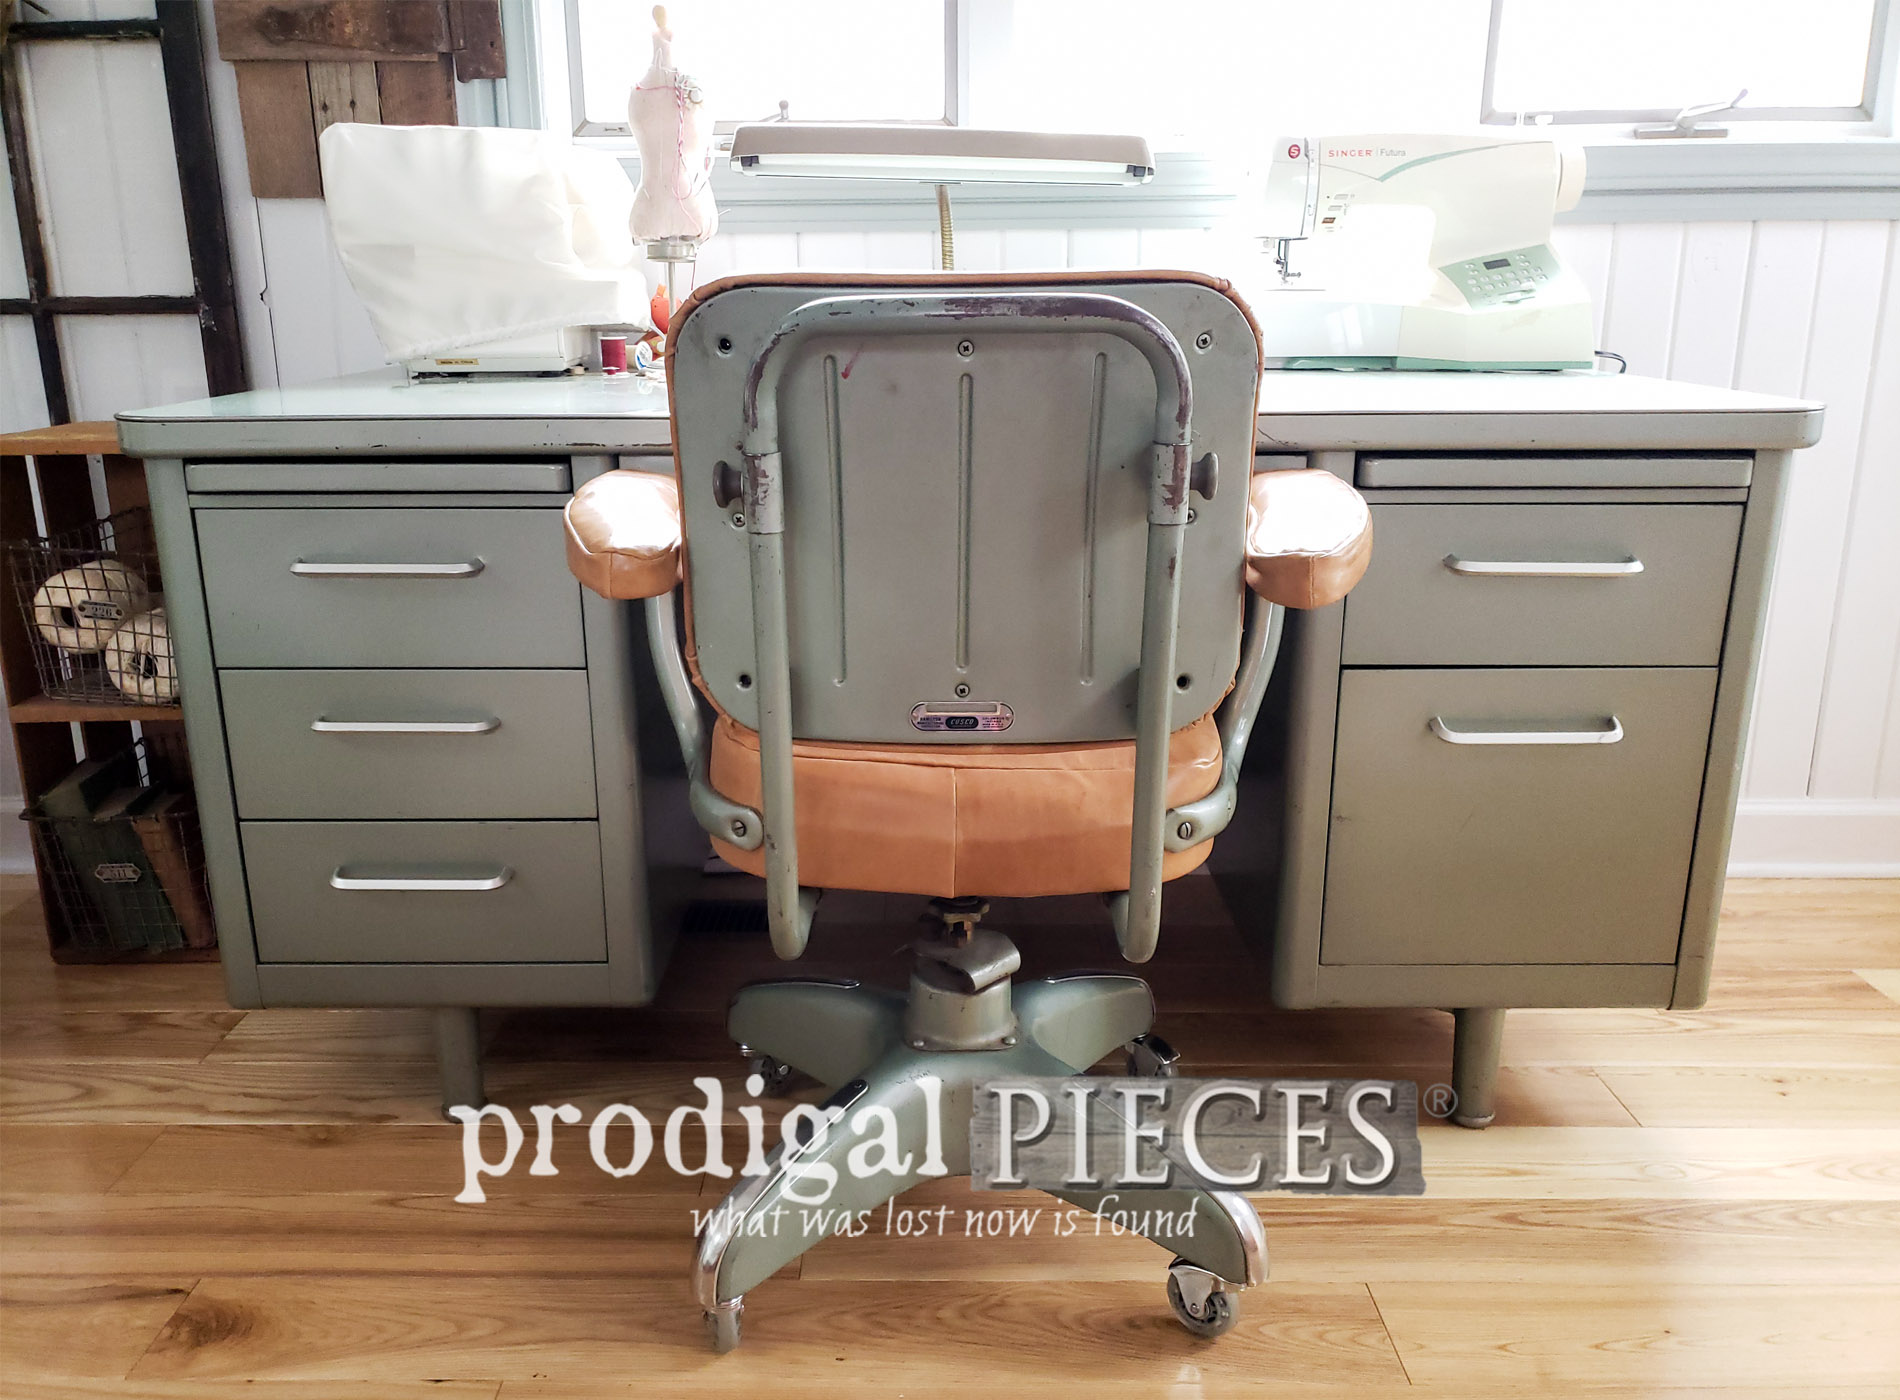 Featured Vintage Industrial Office Chair Reupholstered with Leather | Video Tutorial by Larissa of Prodigal Pieces | prodigalpieces.com #prodigalpieces #diy #furniture #home #vintage #homedecor